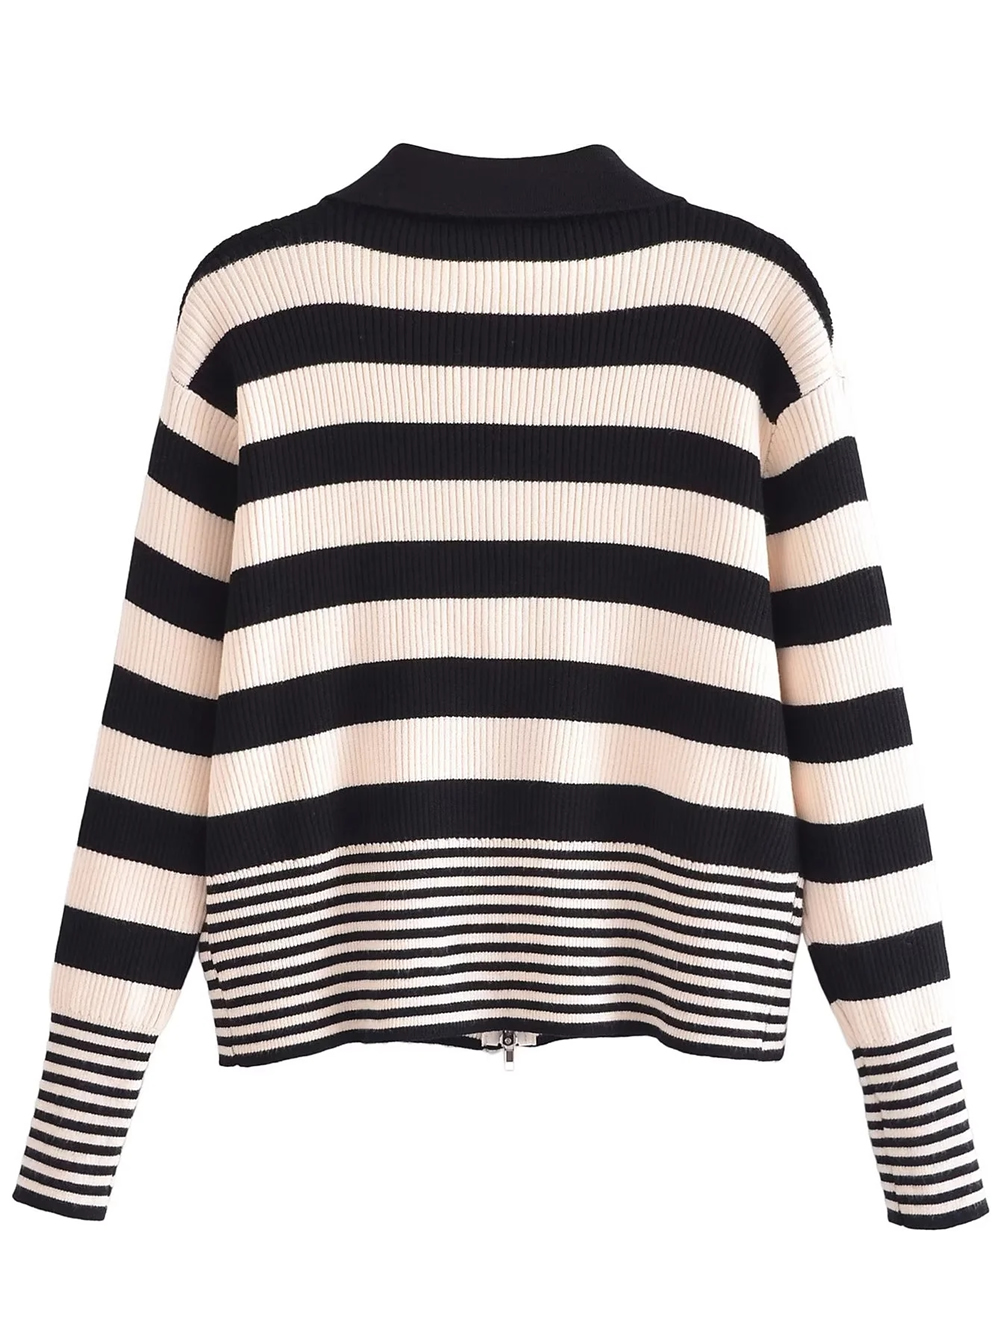 Fashion Black And White Black And White Striped Cardigan,Sweater